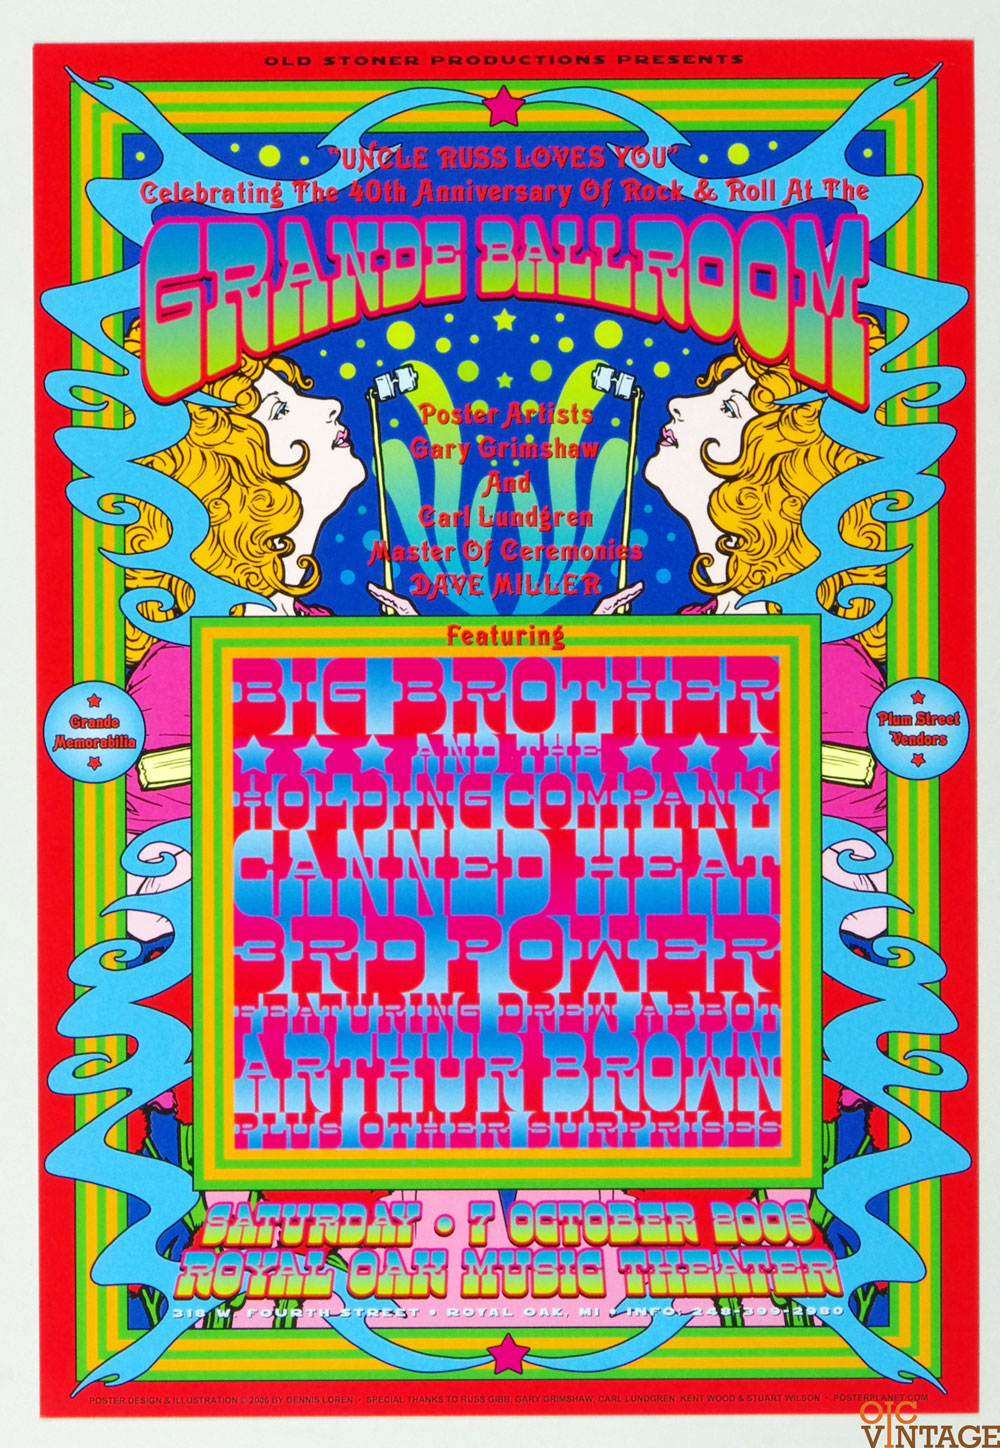 Big Brother and Holding Company Poster 2006 Grande Ballroom 40th Anniversary